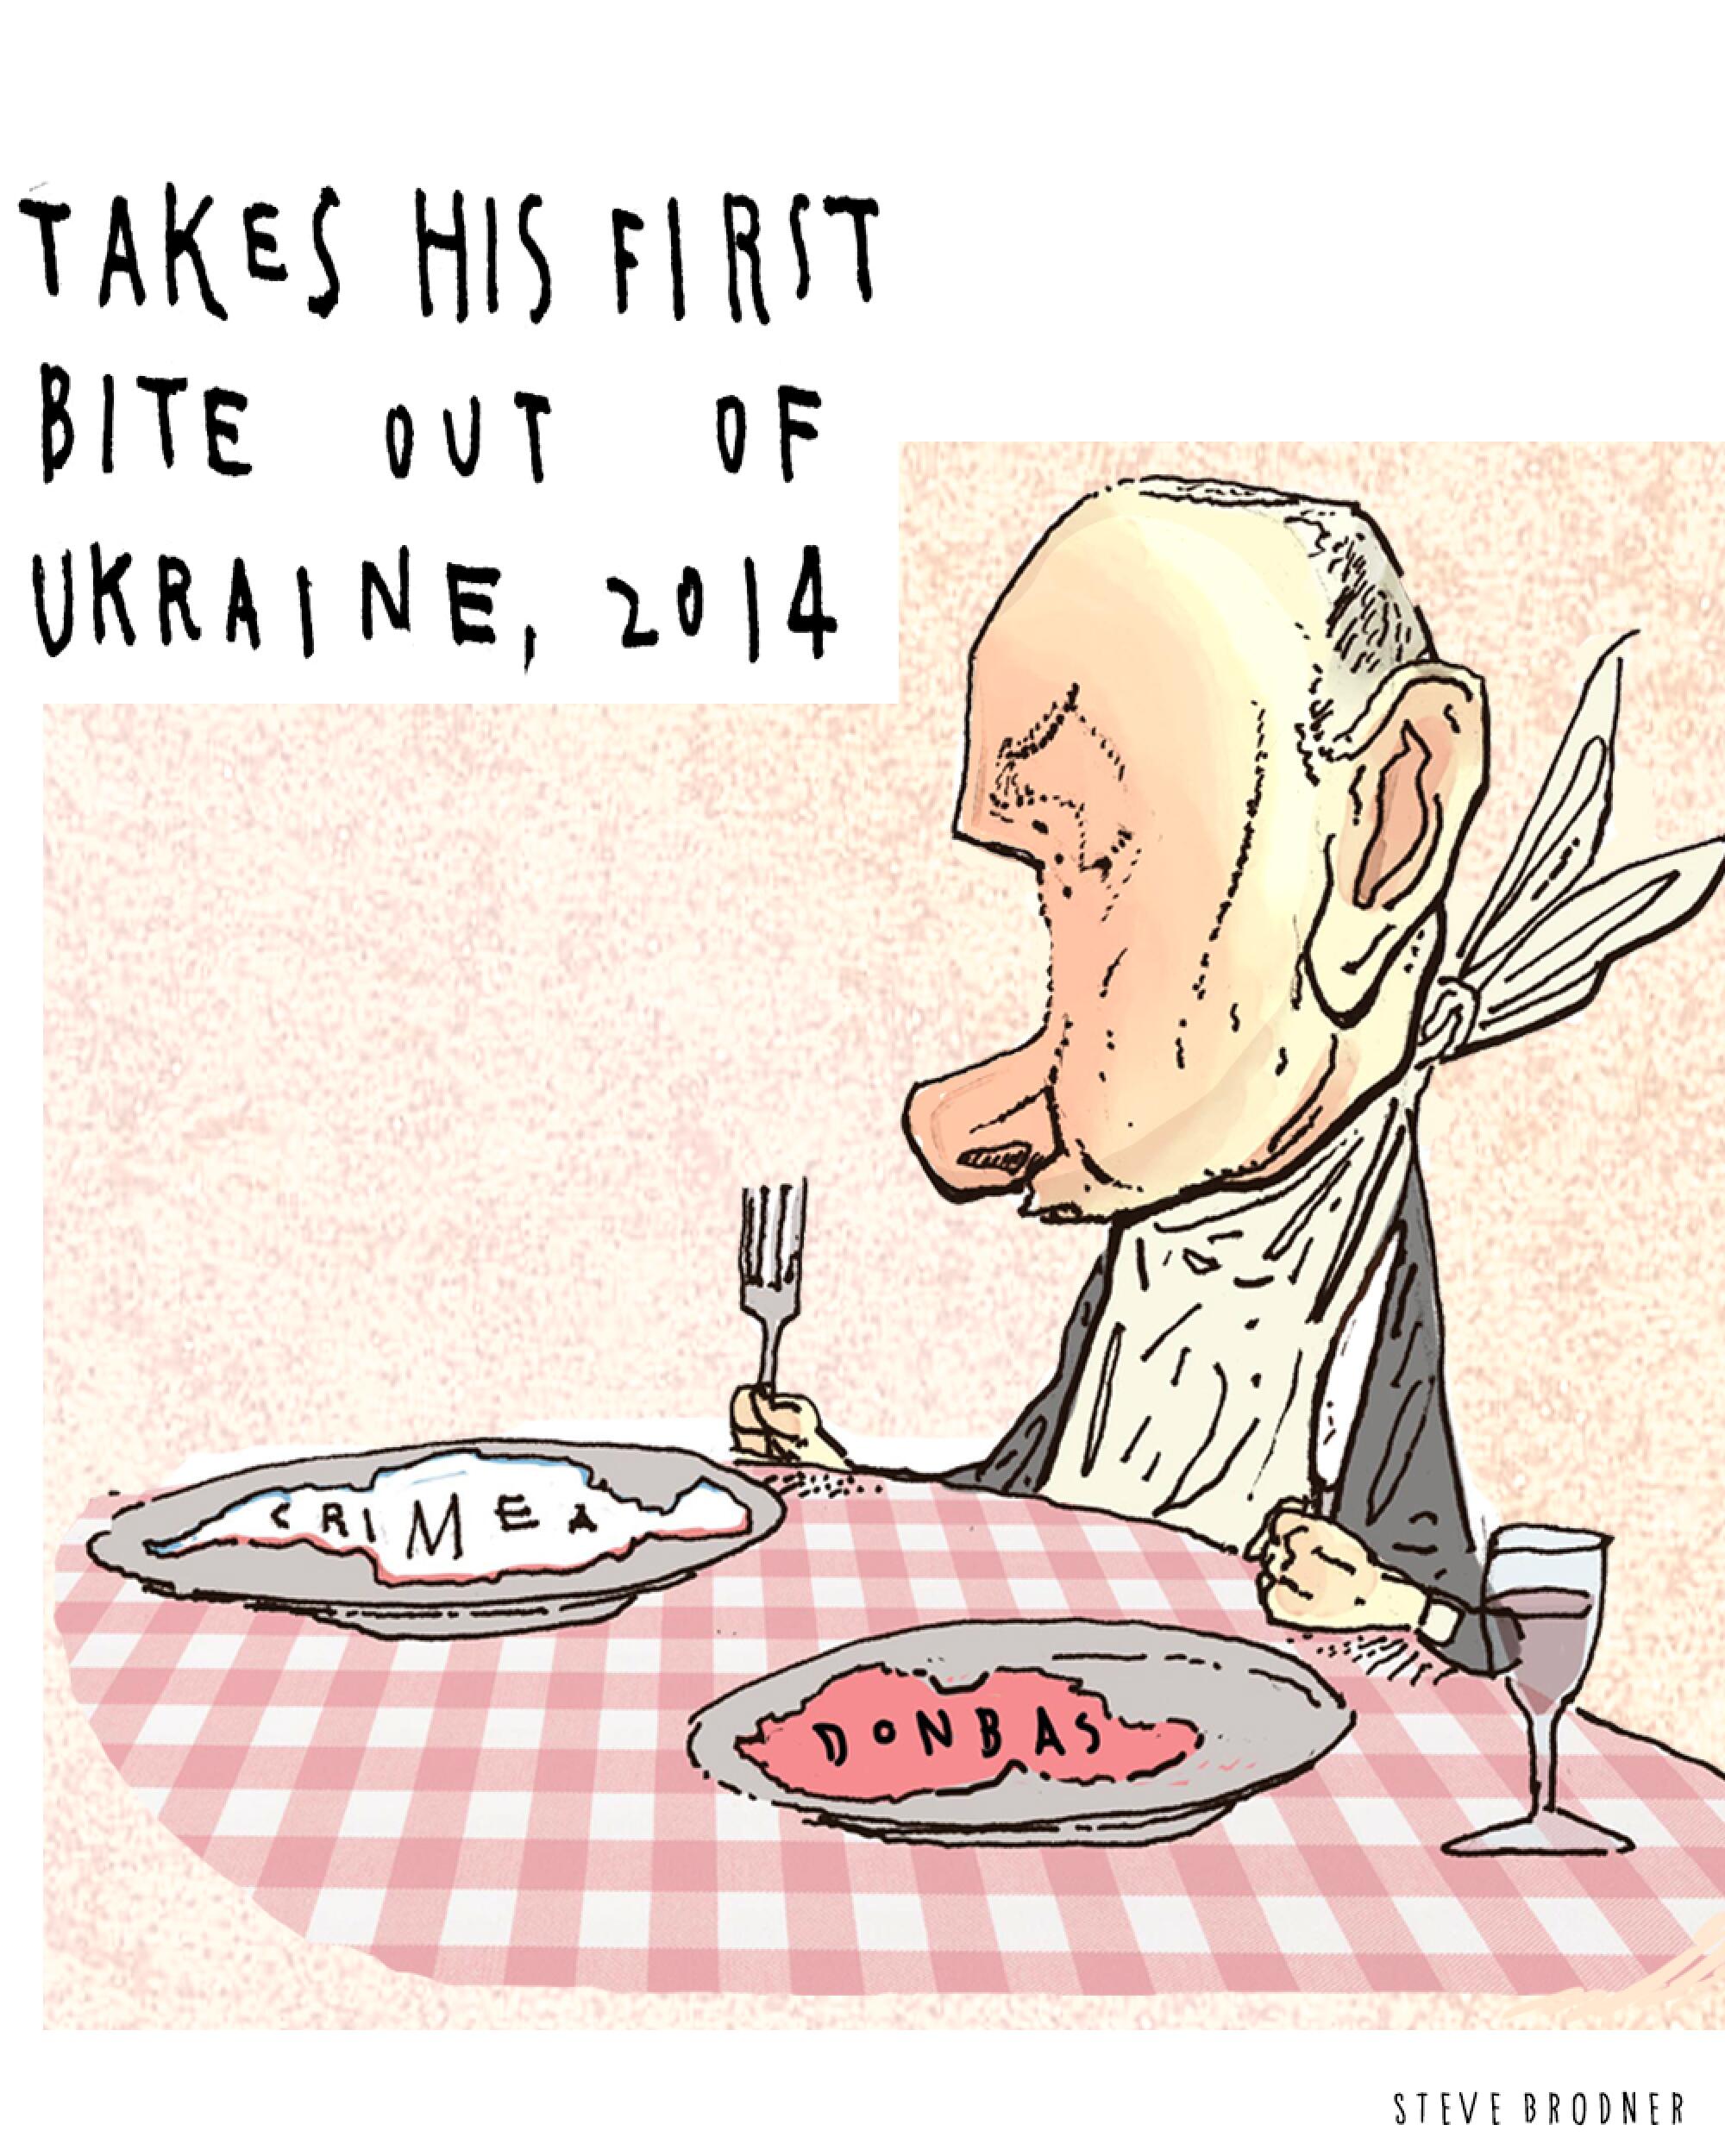 Putin at a table with Crimea and Donbas on dinner plates. Text: "Takes his first bite out of Ukraine, 2014"